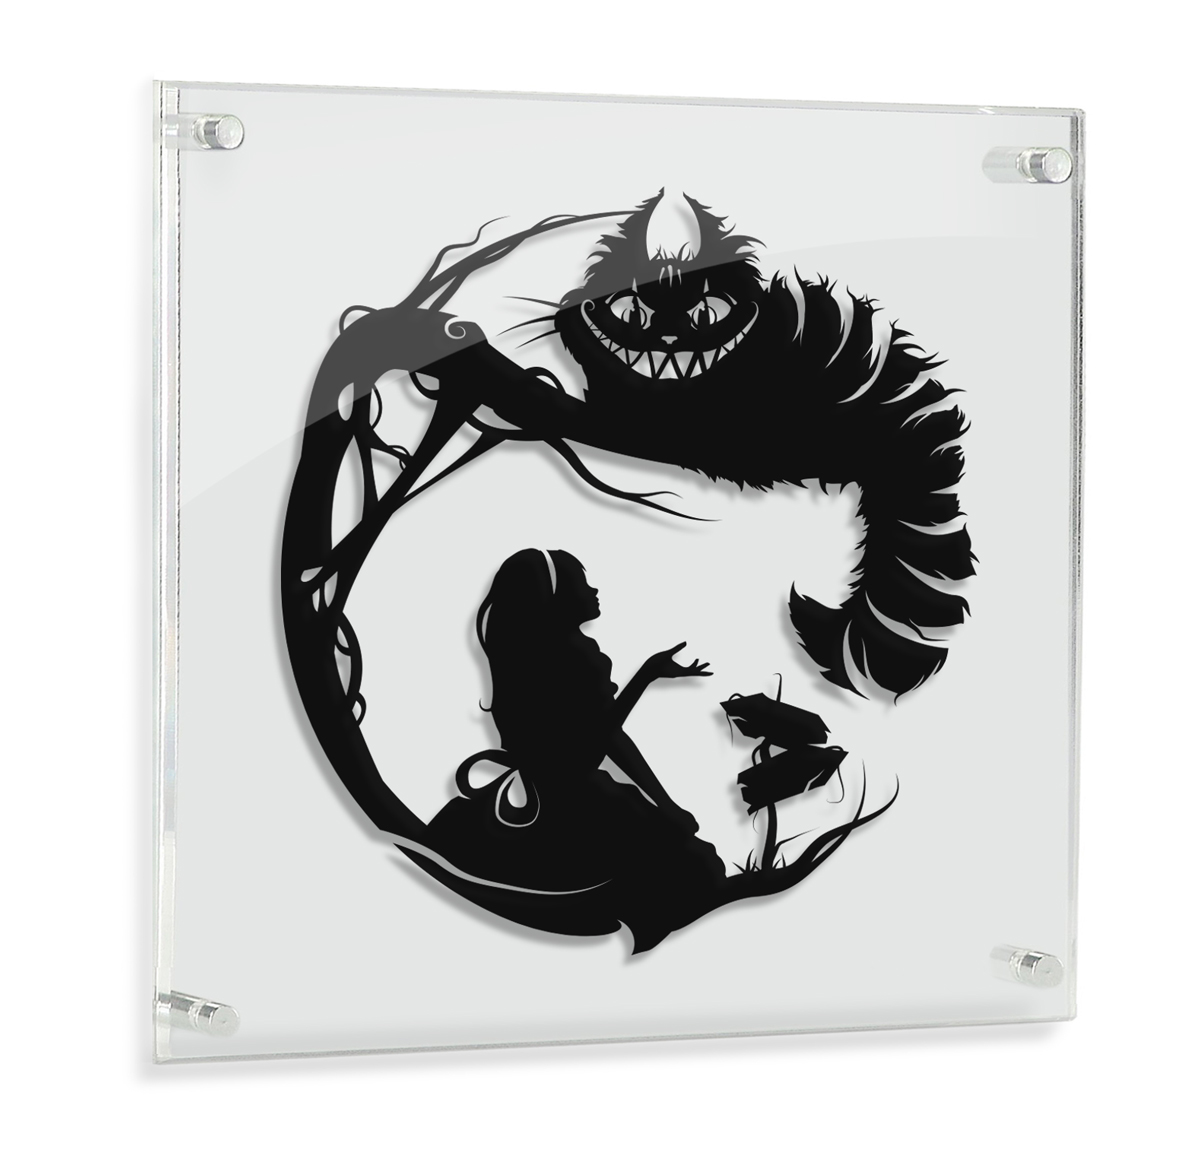 AW10-J Hand Cut Wooden Alice in Wonderland Cheshire Cat Magnet 